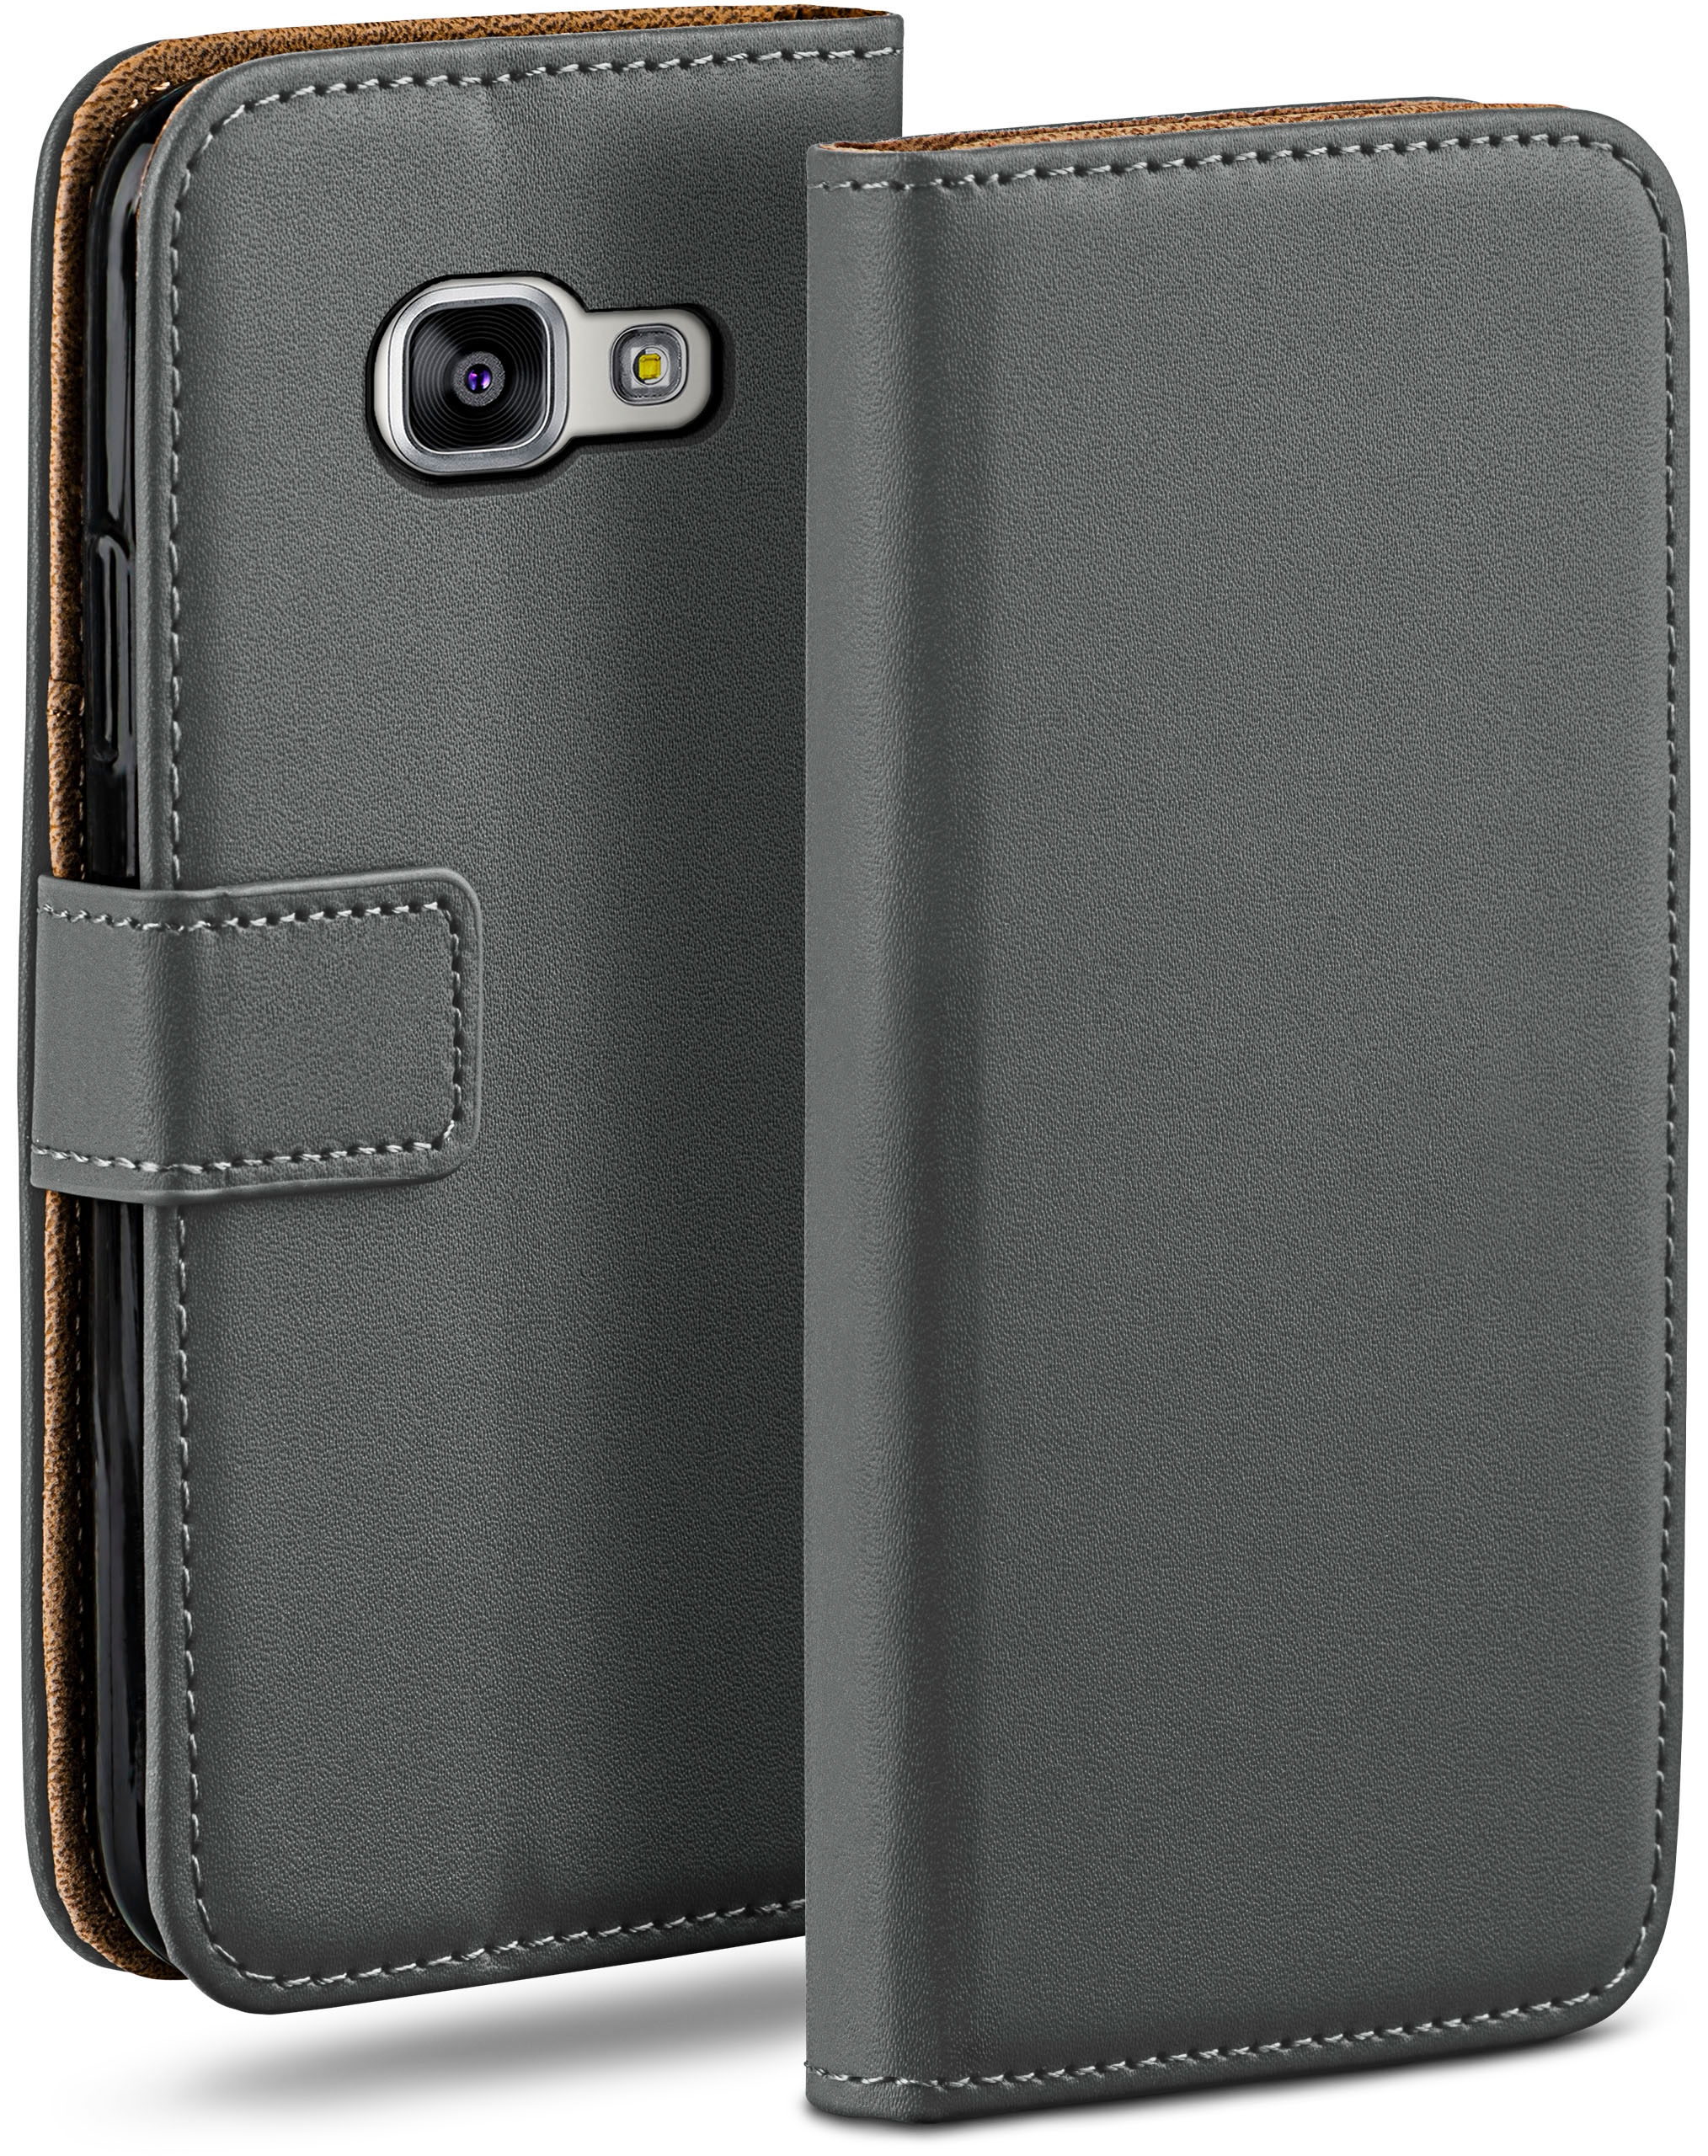 MOEX Book Samsung, (2016), Anthracite-Gray Bookcover, A3 Galaxy Case